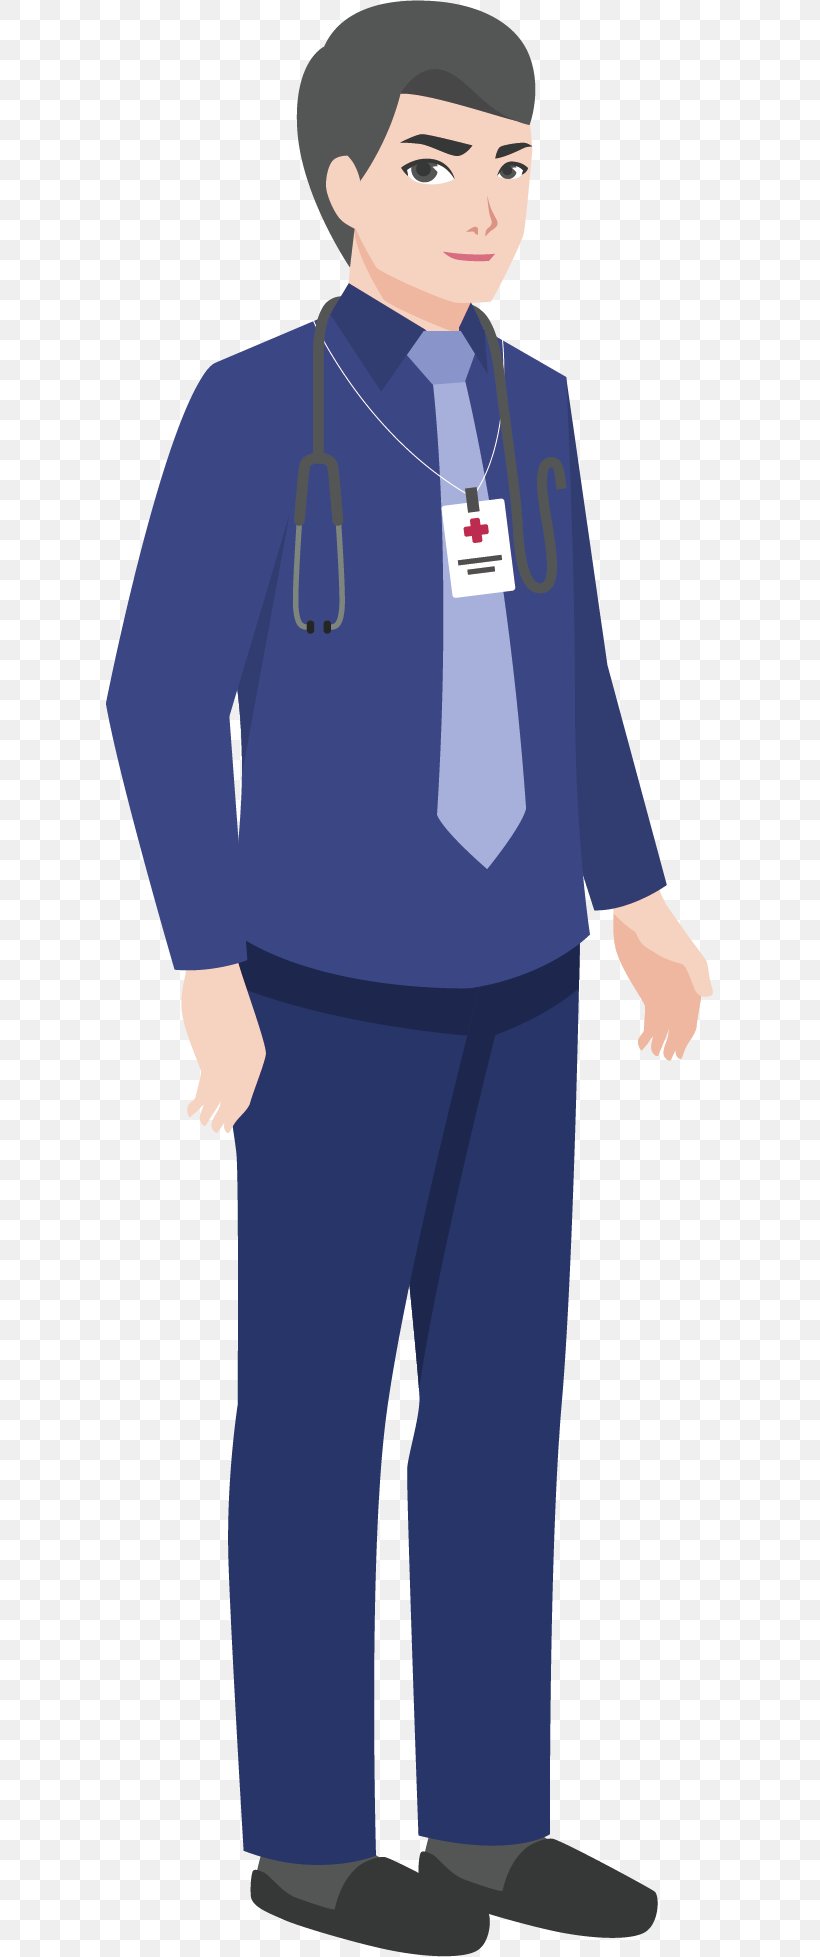 Physician Cartoon Illustration, PNG, 607x1957px, Physician, Attending Physician, Avatar, Cartoon, Costume Download Free